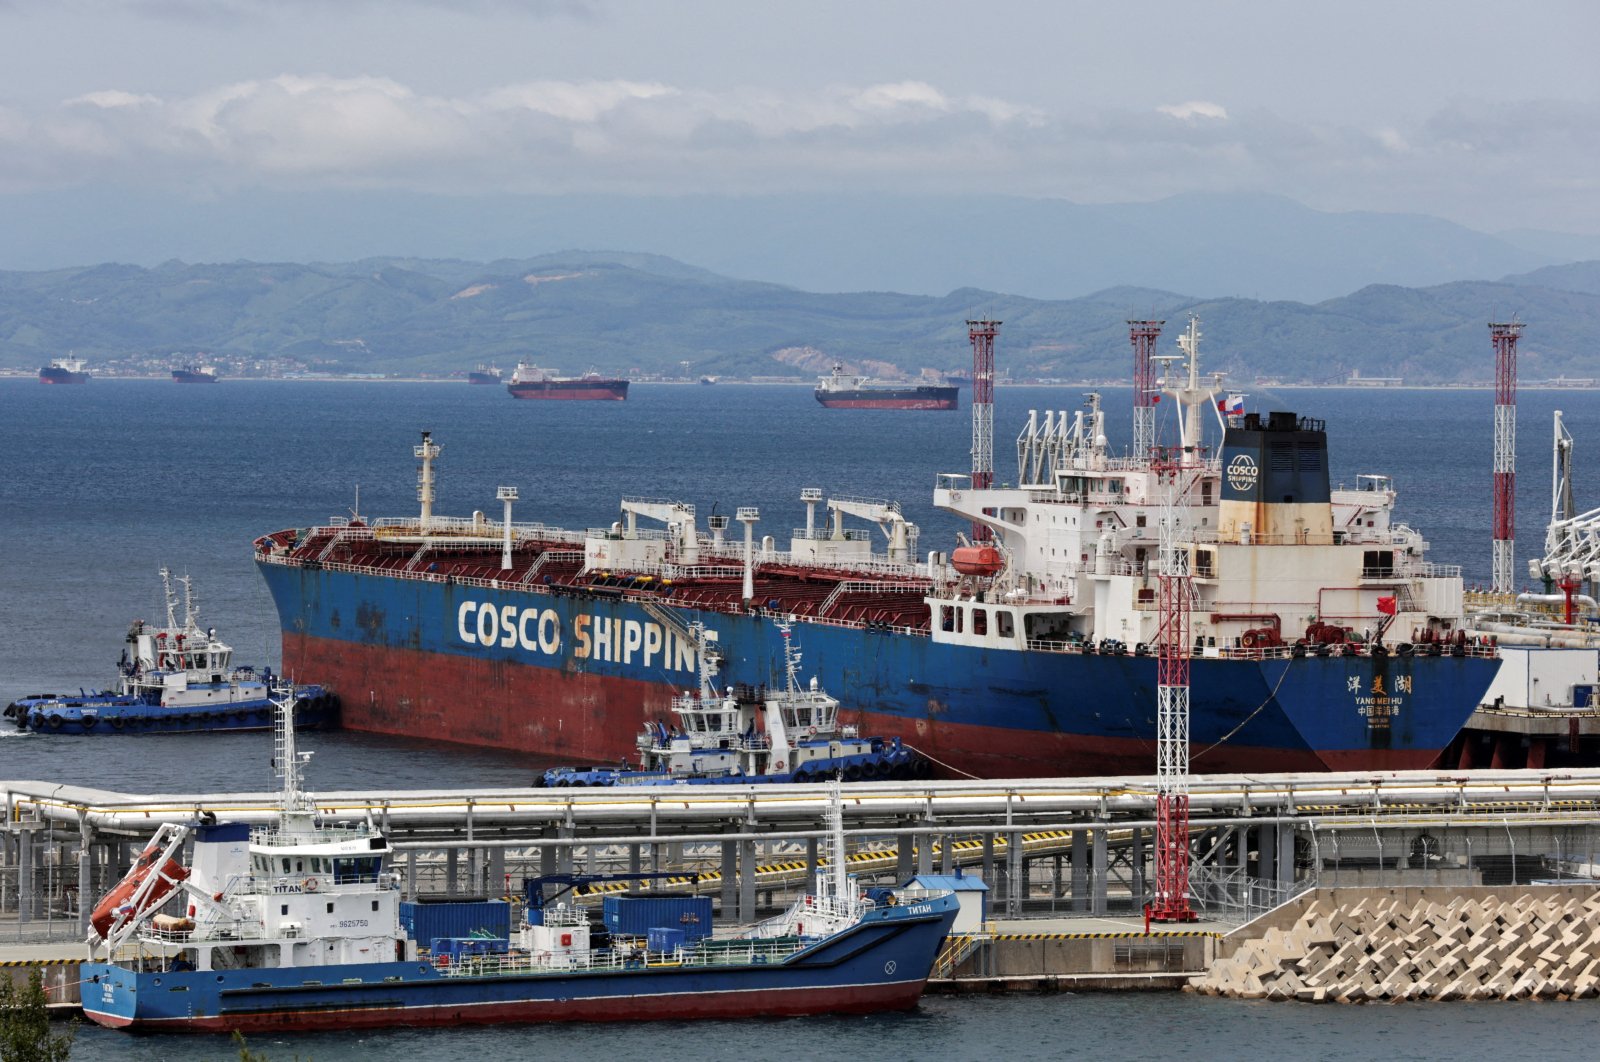 The Yang Mei Hu oil products tanker owned by COSCO Shipping gets moored at the crude oil terminal Kozmino on the shore of Nakhodka Bay near the port city of Nakhodka, Russia, June 13, 2022. (Reuters Photo)